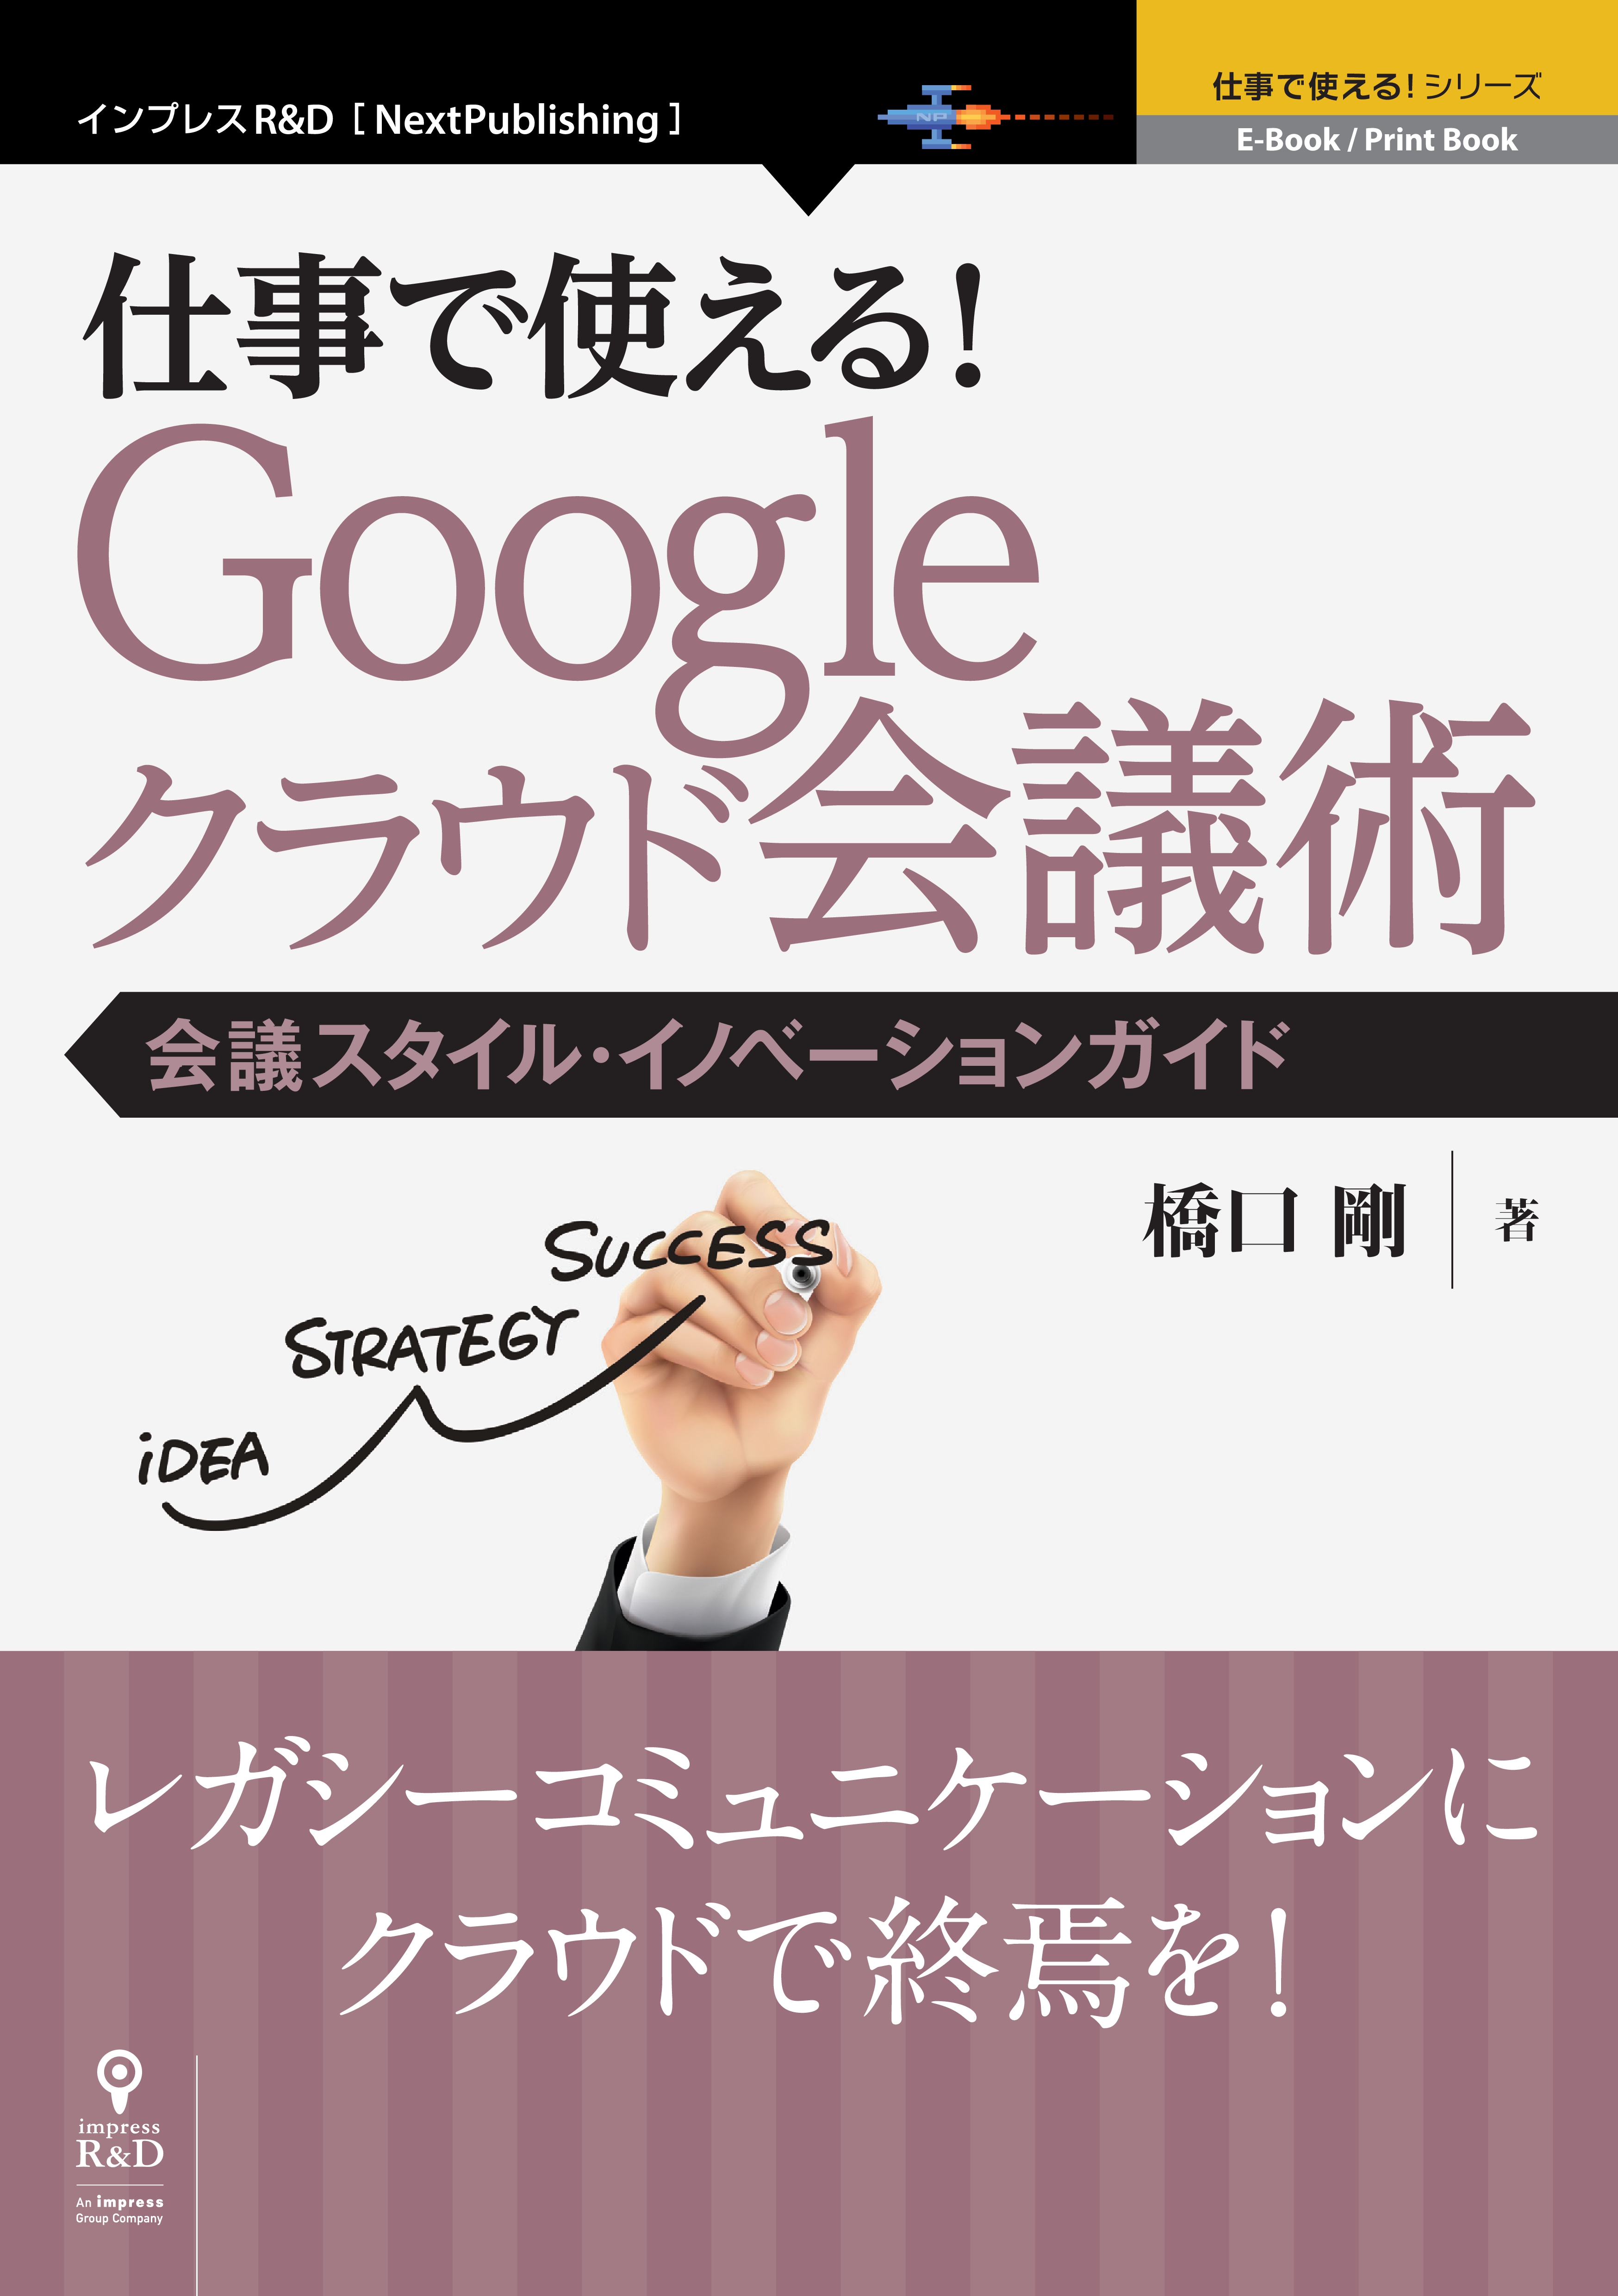 From an Idea to GOOGLE - 洋書